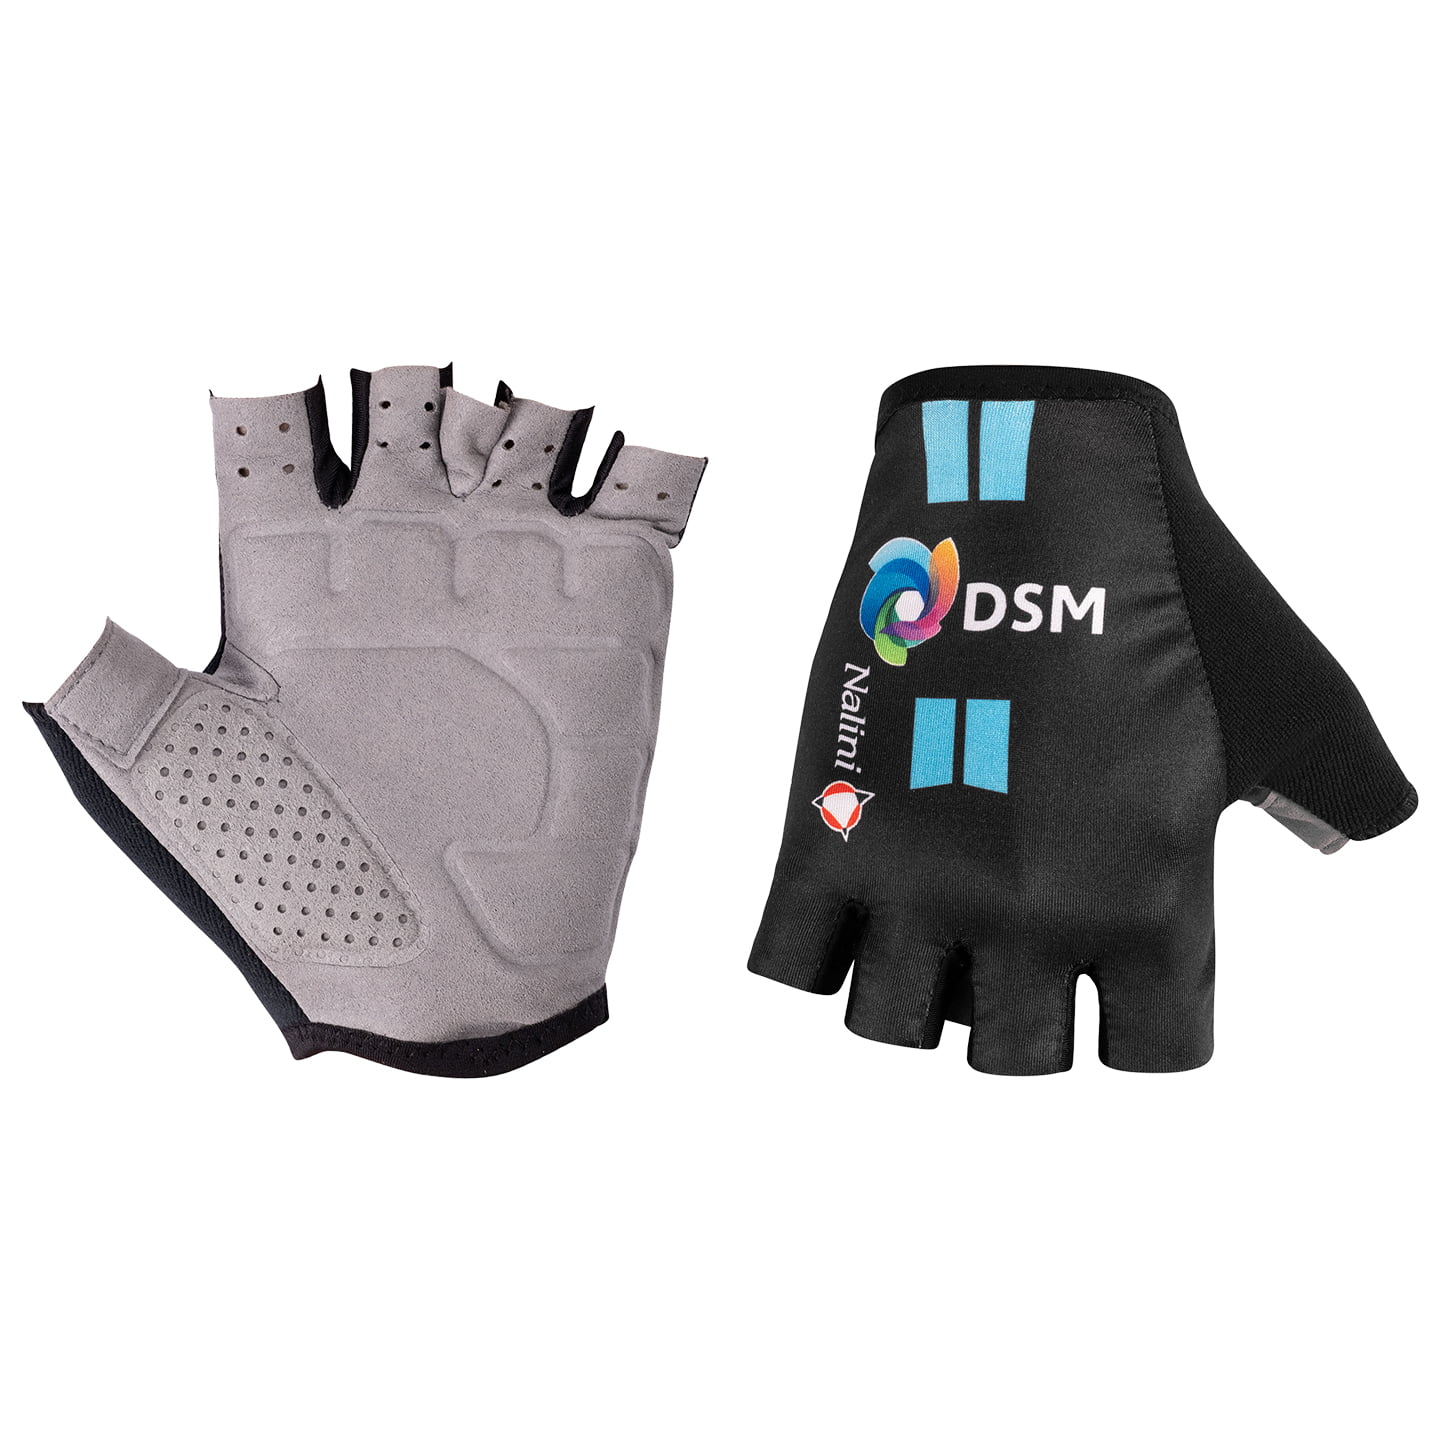 TEAM DSM 2022 Cycling Gloves, for men, size XL, Cycling gloves, Cycle gear